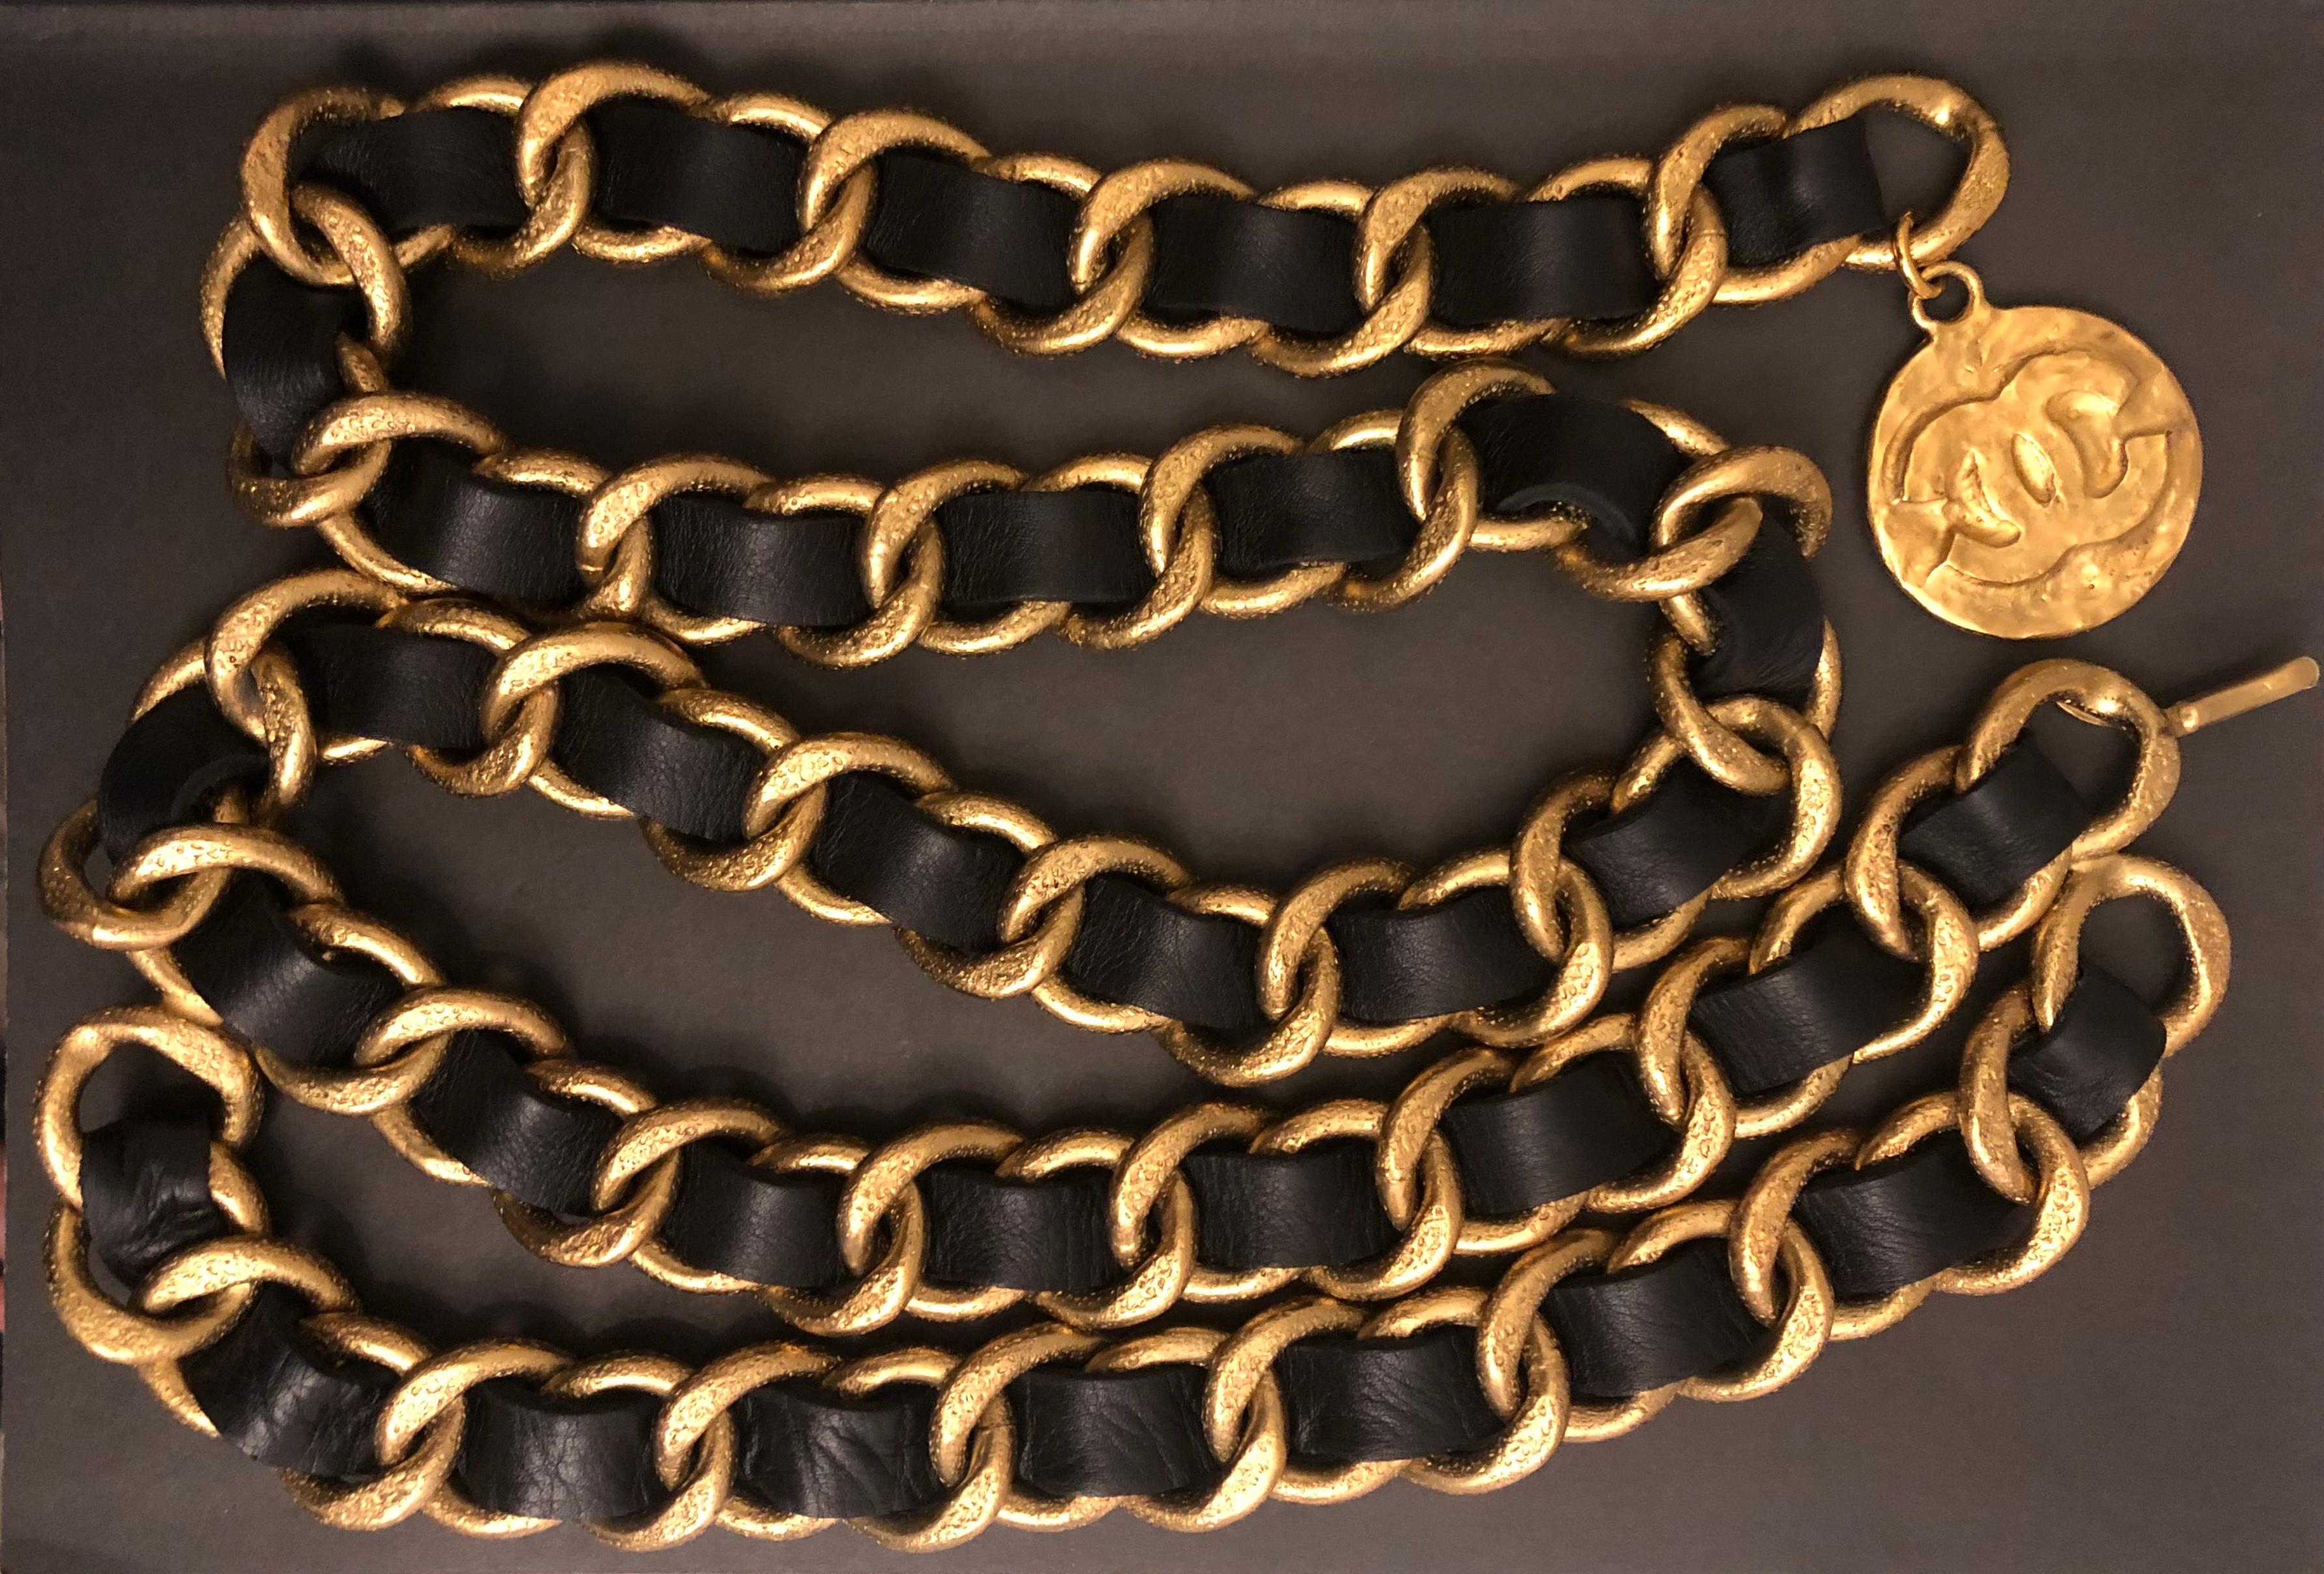 This vintage Chanel chain belt is crafted of massive gold toned textured chain interlaced with black leather featuring double chain draping and a Byzantine styled CC medallion coin charm. Seen on 1993 SS Runway. Stamped CHANEL 93A made in France.